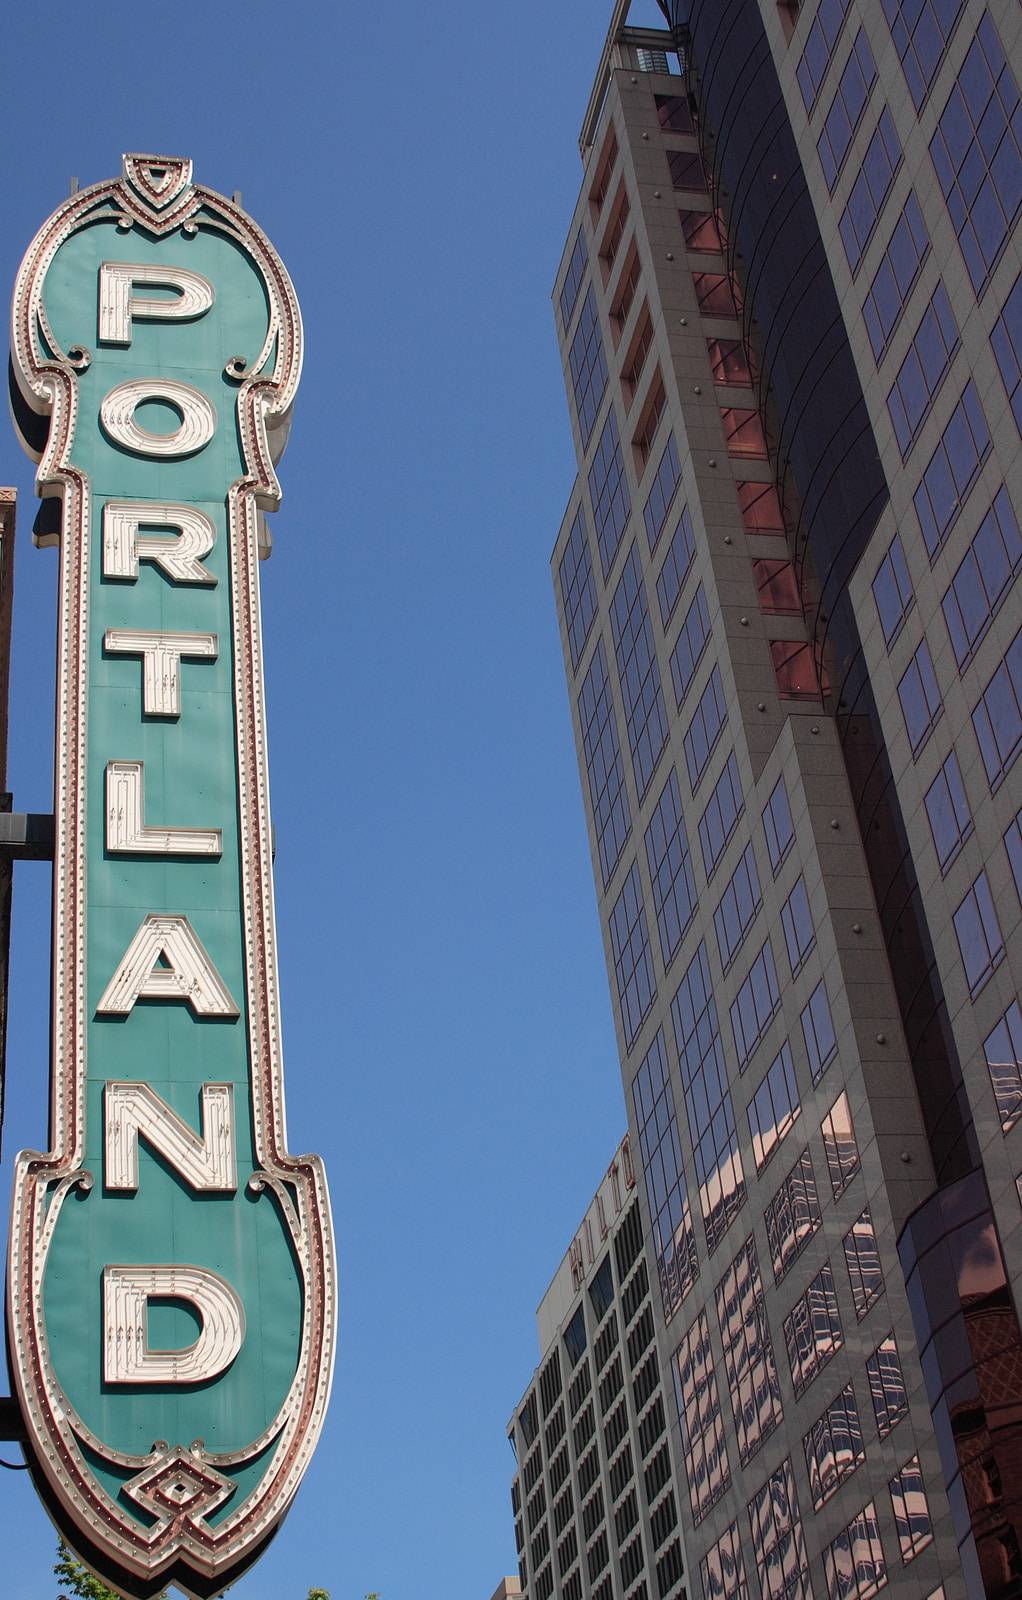 Historic theater landmark in downtown Portland Oregon by Cooper DuBois